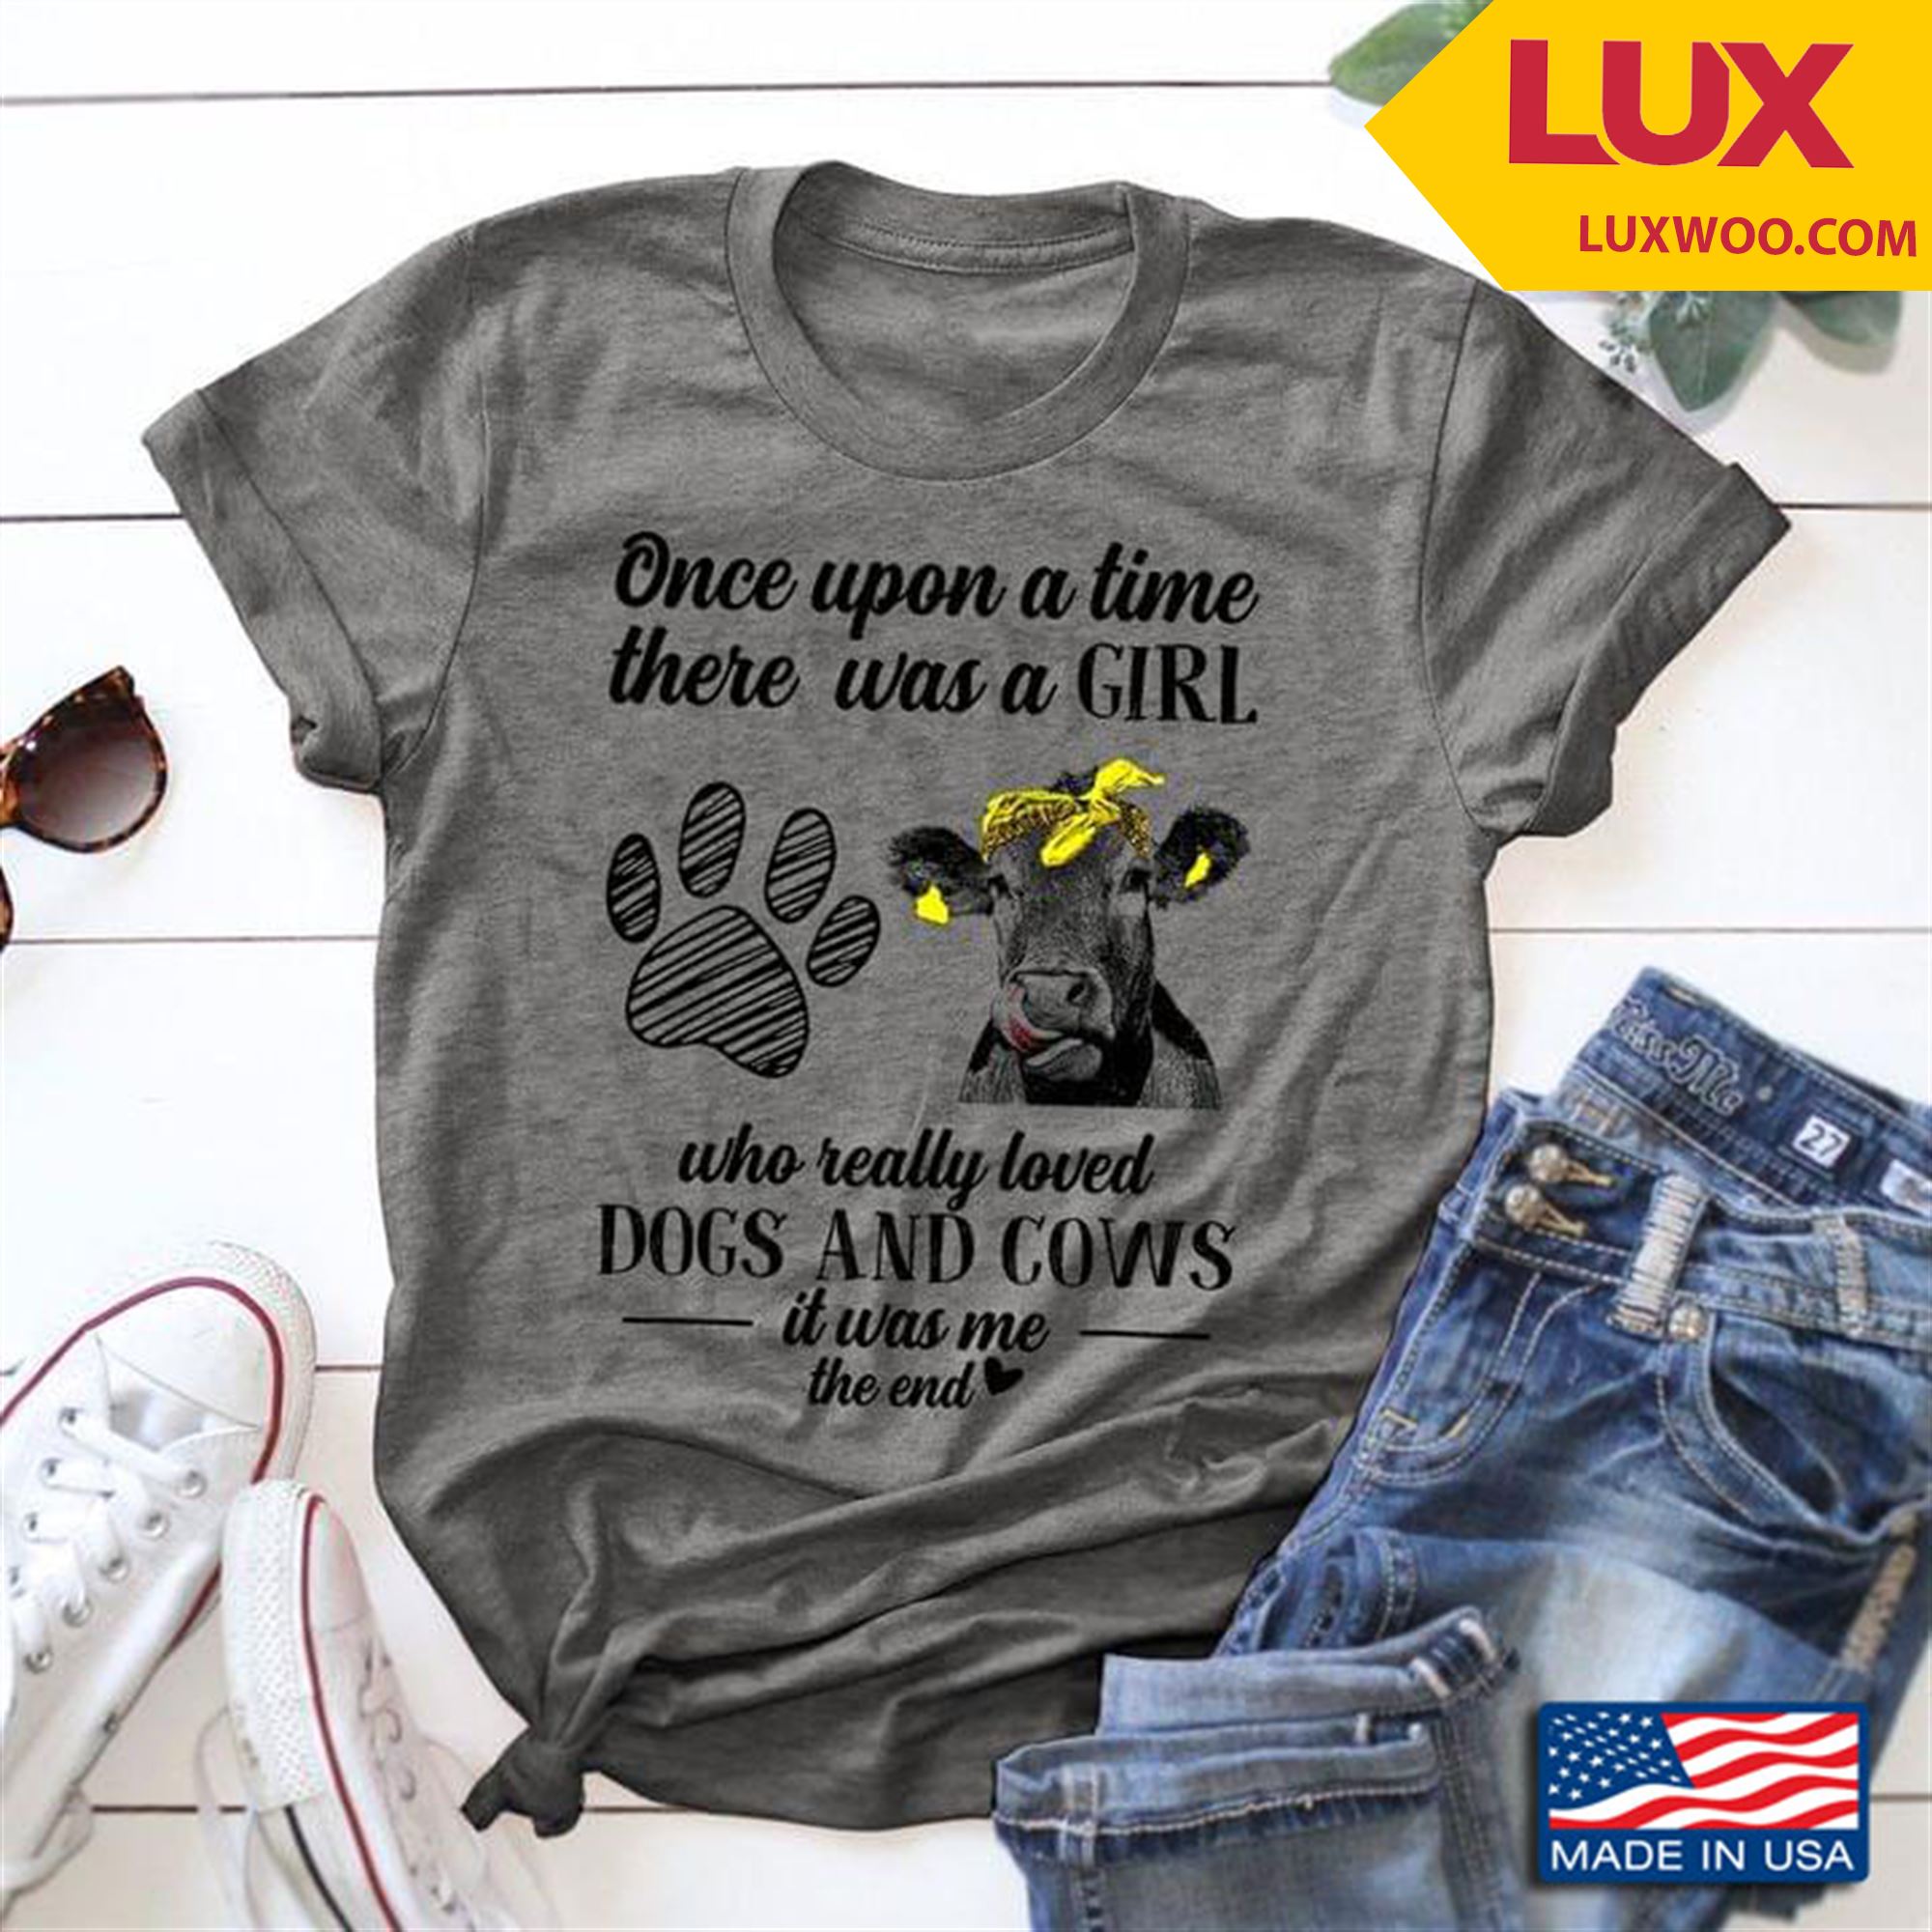 Once Upon A Time There Was A Girl Who Really Loved Dogs And Cows It Was Me The End Grey Version Tshirt Plus Size Up To 5xl